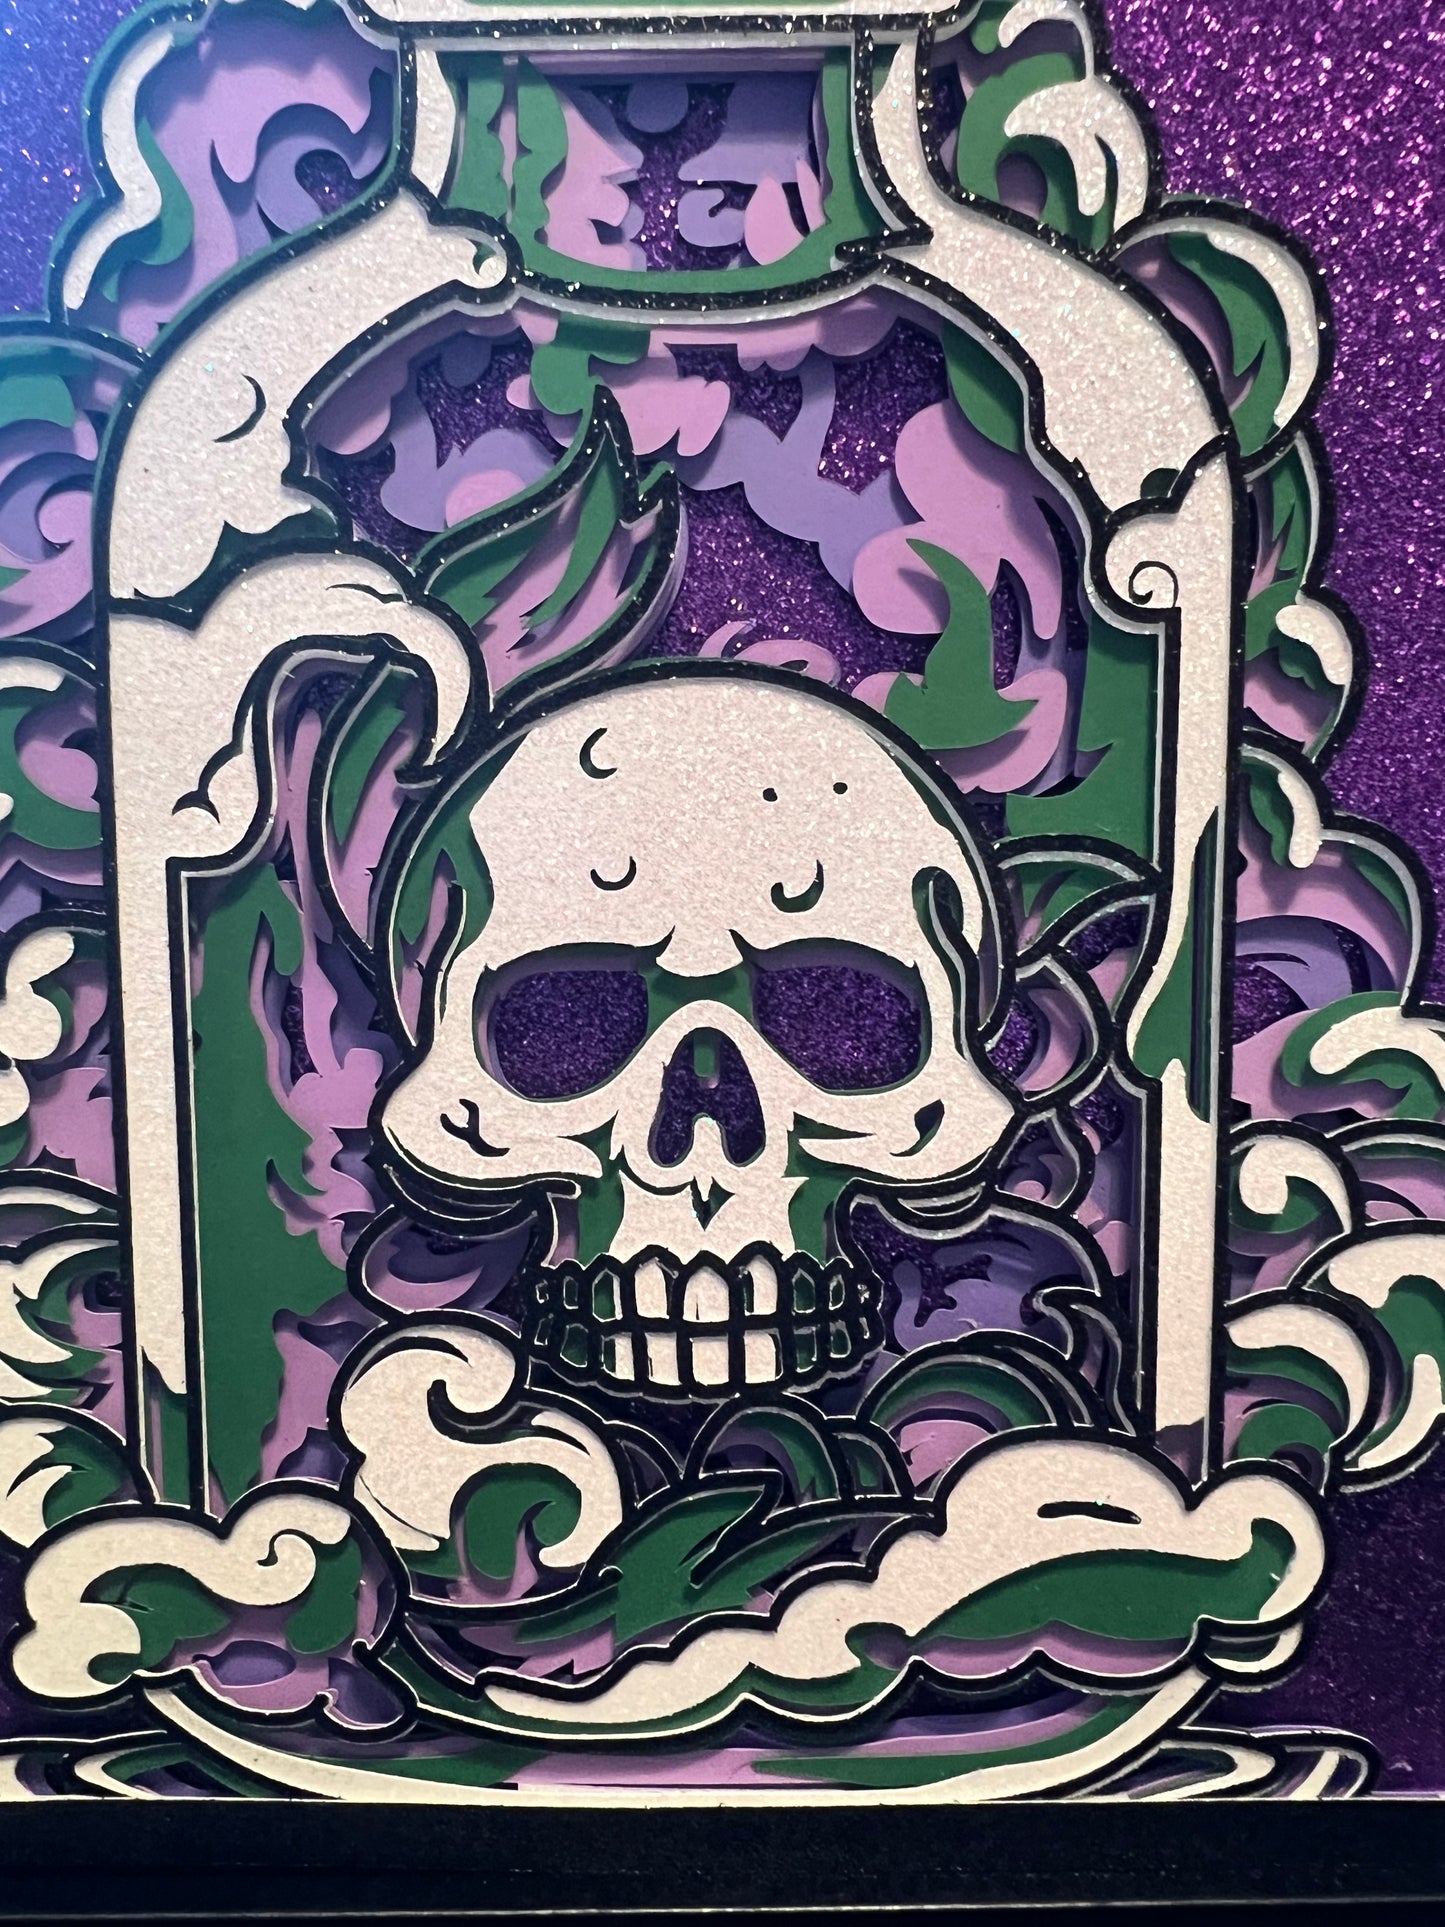 Skull in Apothecary Jar, Layered Cut Paper, Shadowbox, Purples and Greens